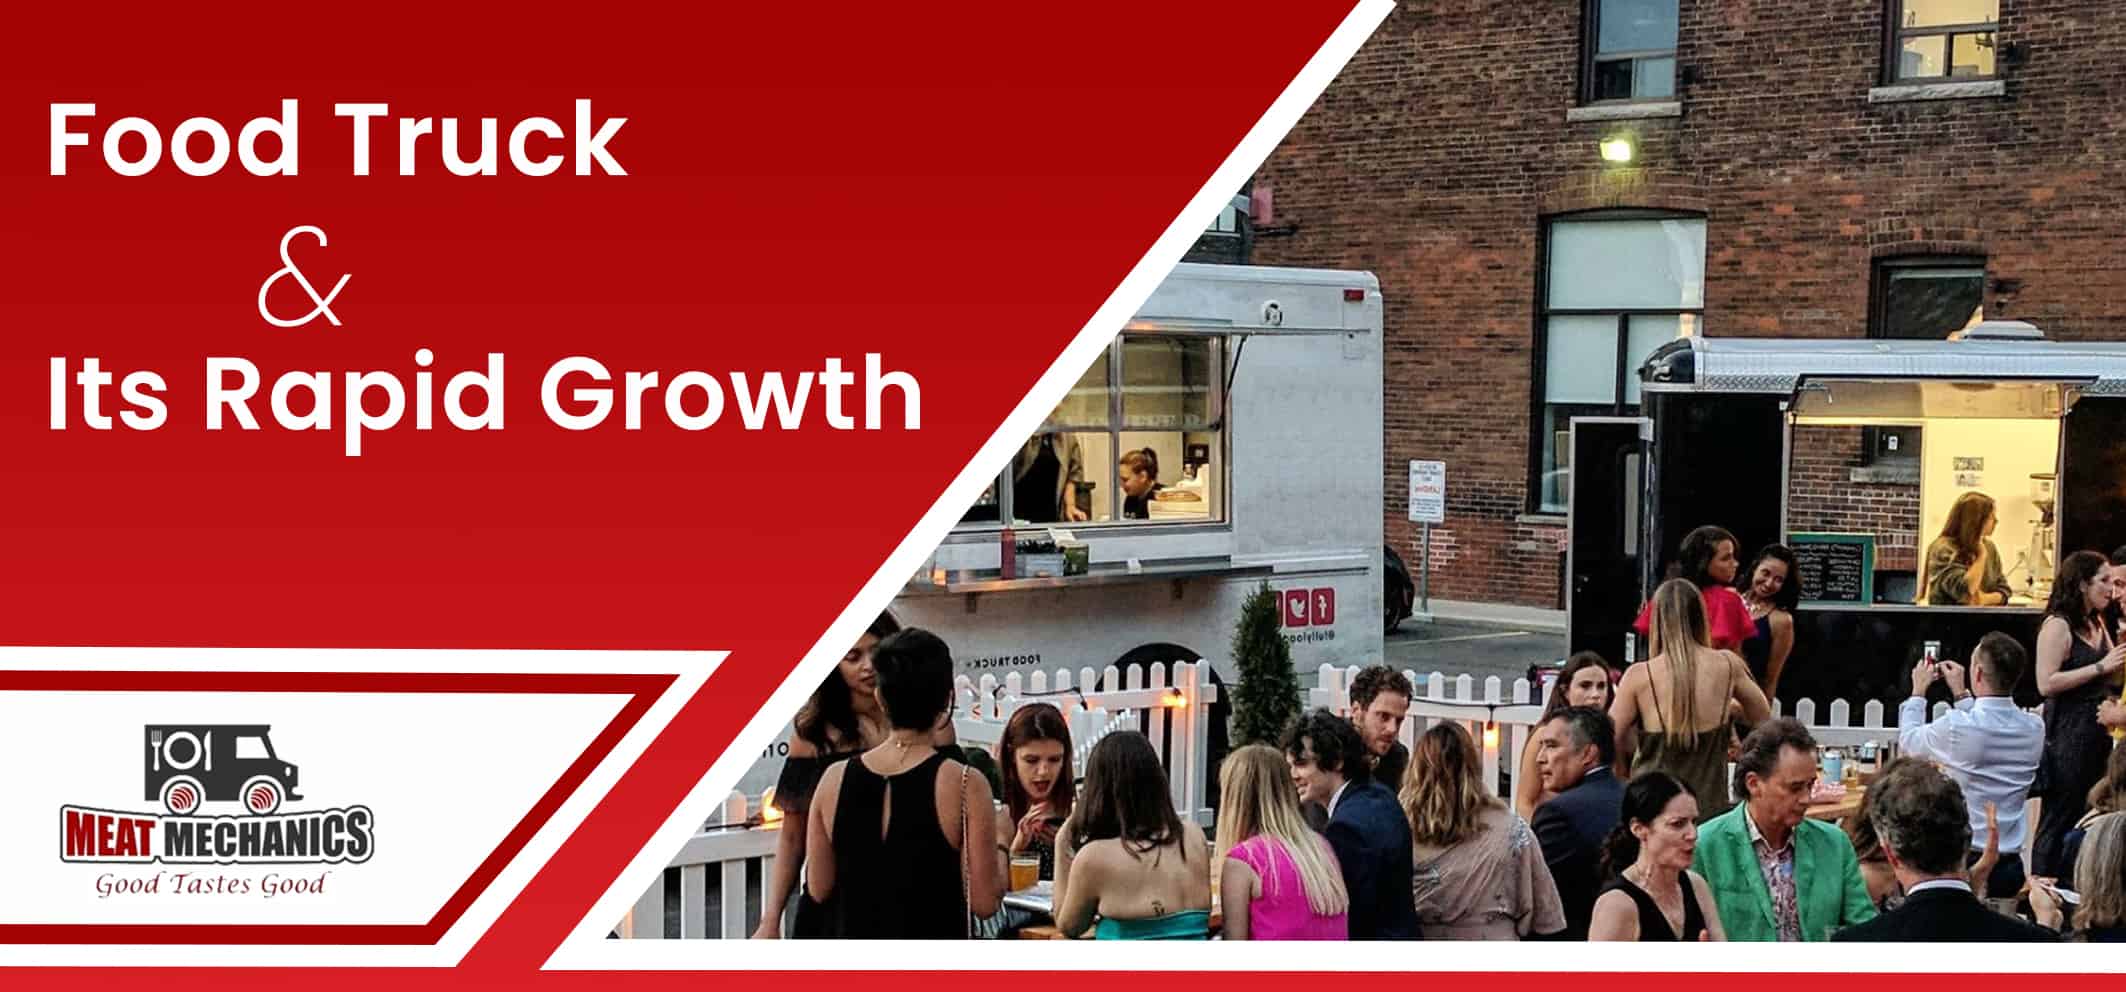 Grow Your Culinary Art And Business With The Help Of A Food Truck